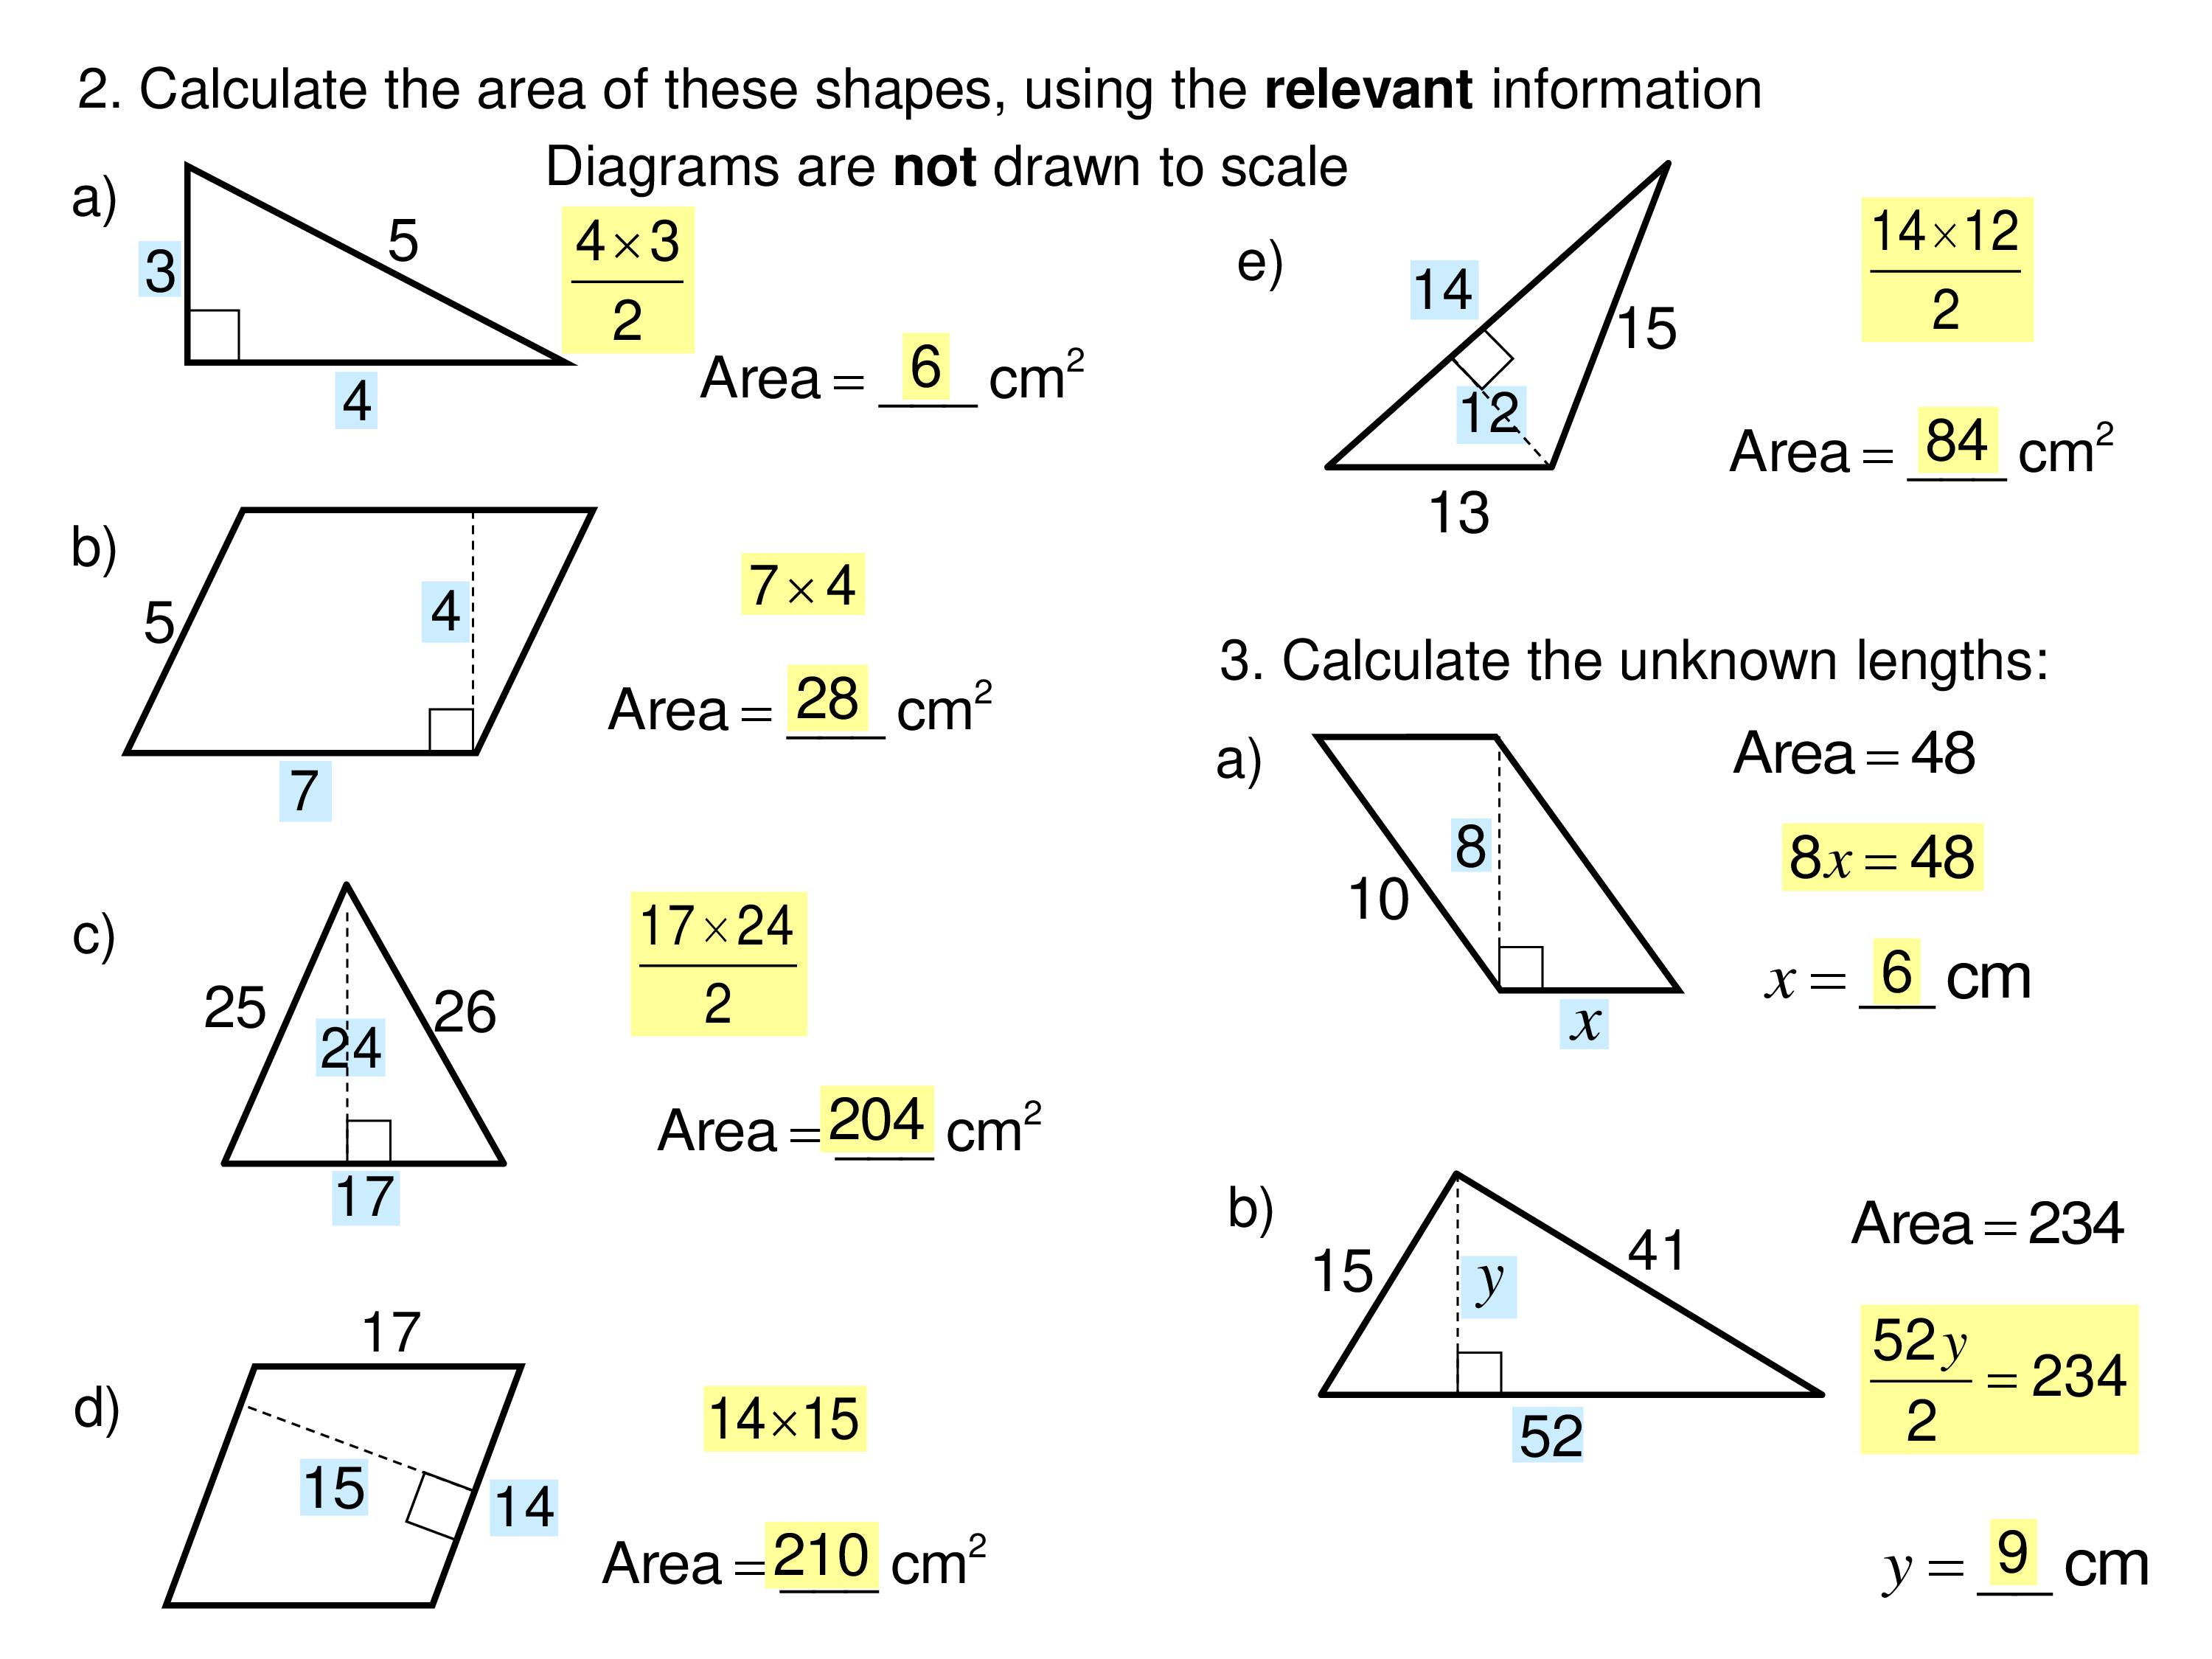 PPT On Area Of Triangles And Quadrilaterals - PowerPoint Slides